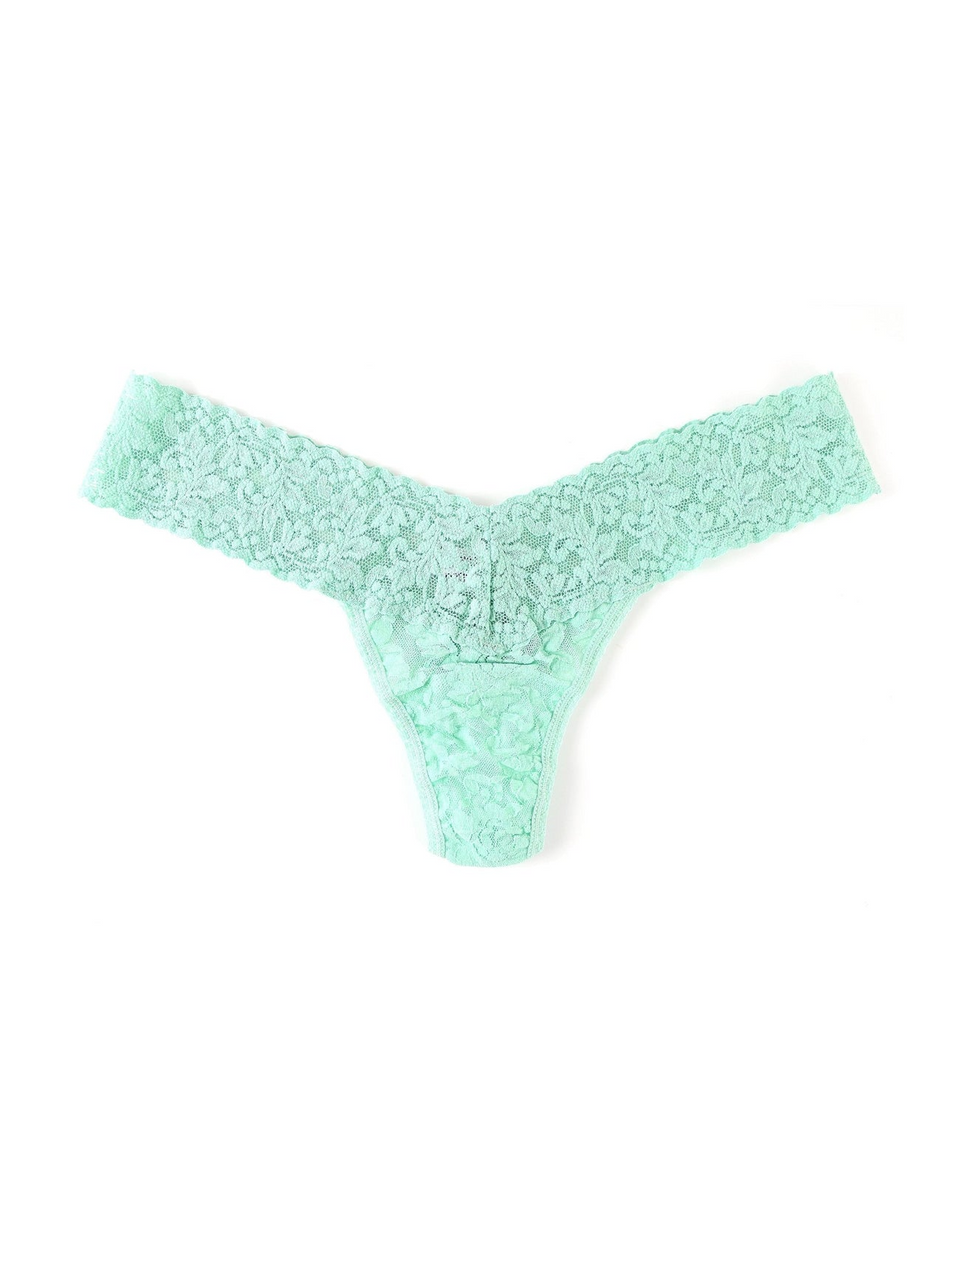 Signature Lace Low Rise Thong - A3 - Bra Necessities